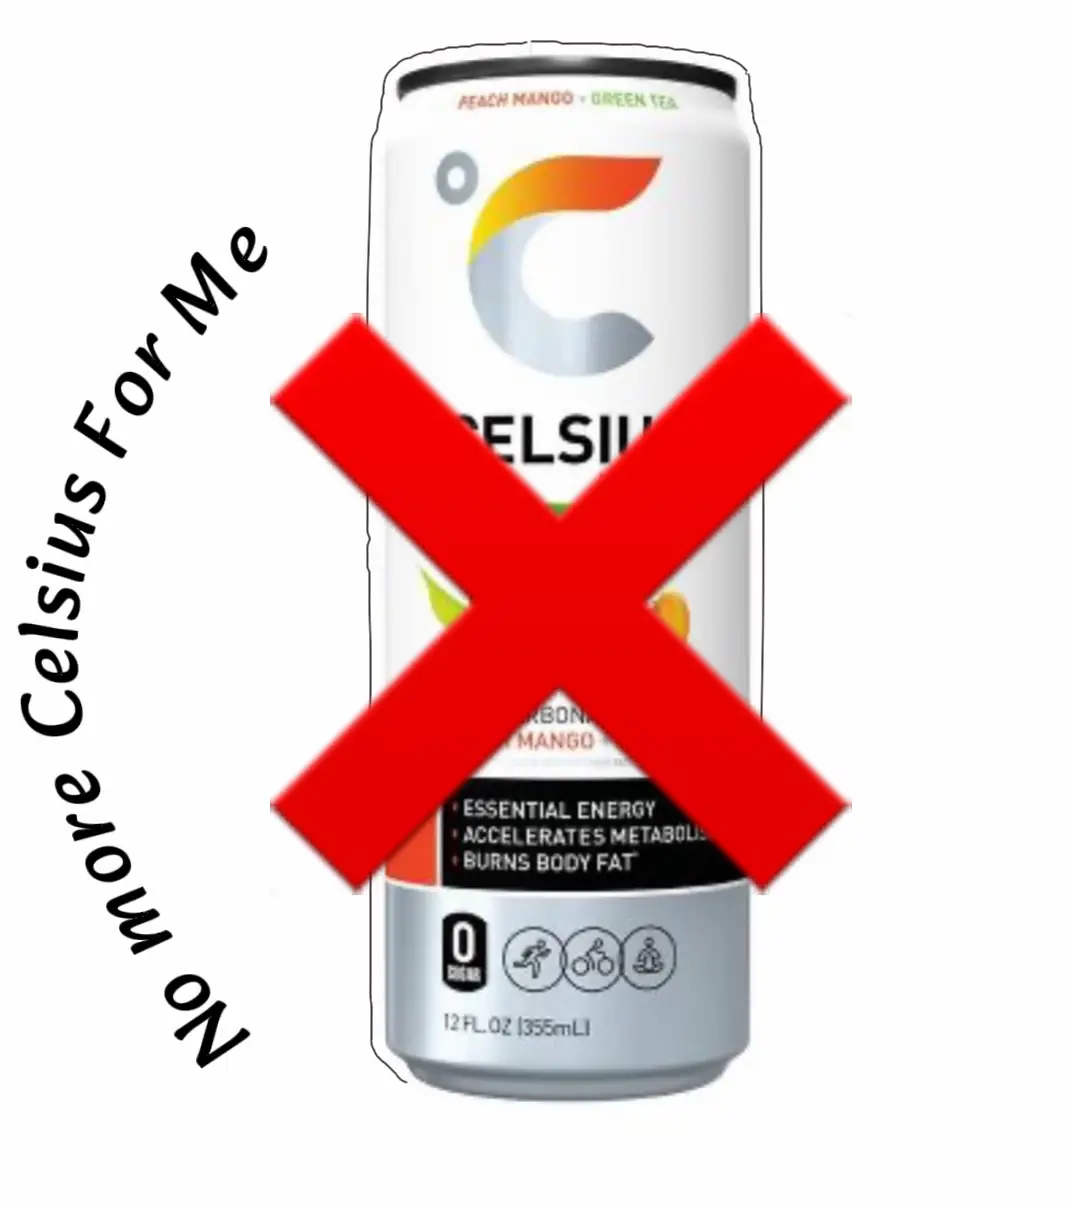 Our CELSIUS Energy Drinks Honest Review